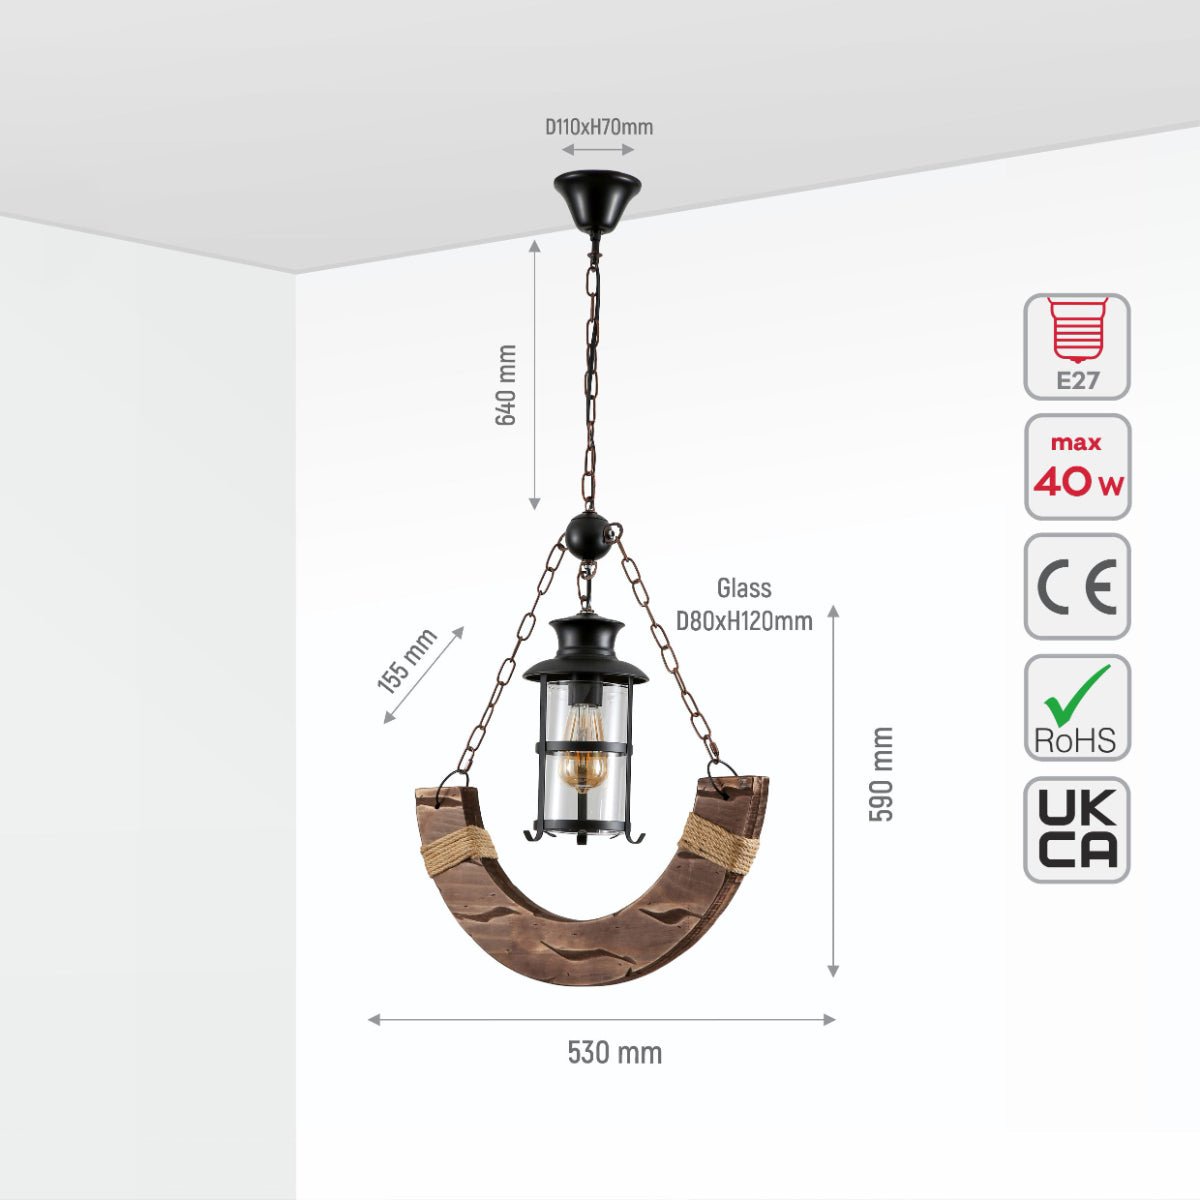 Size and specs of Crescent Wood Glass Cylinder Shaded Rustic Farmhouse Nautical Pendant Ceiling Light E27 | TEKLED 159-17848